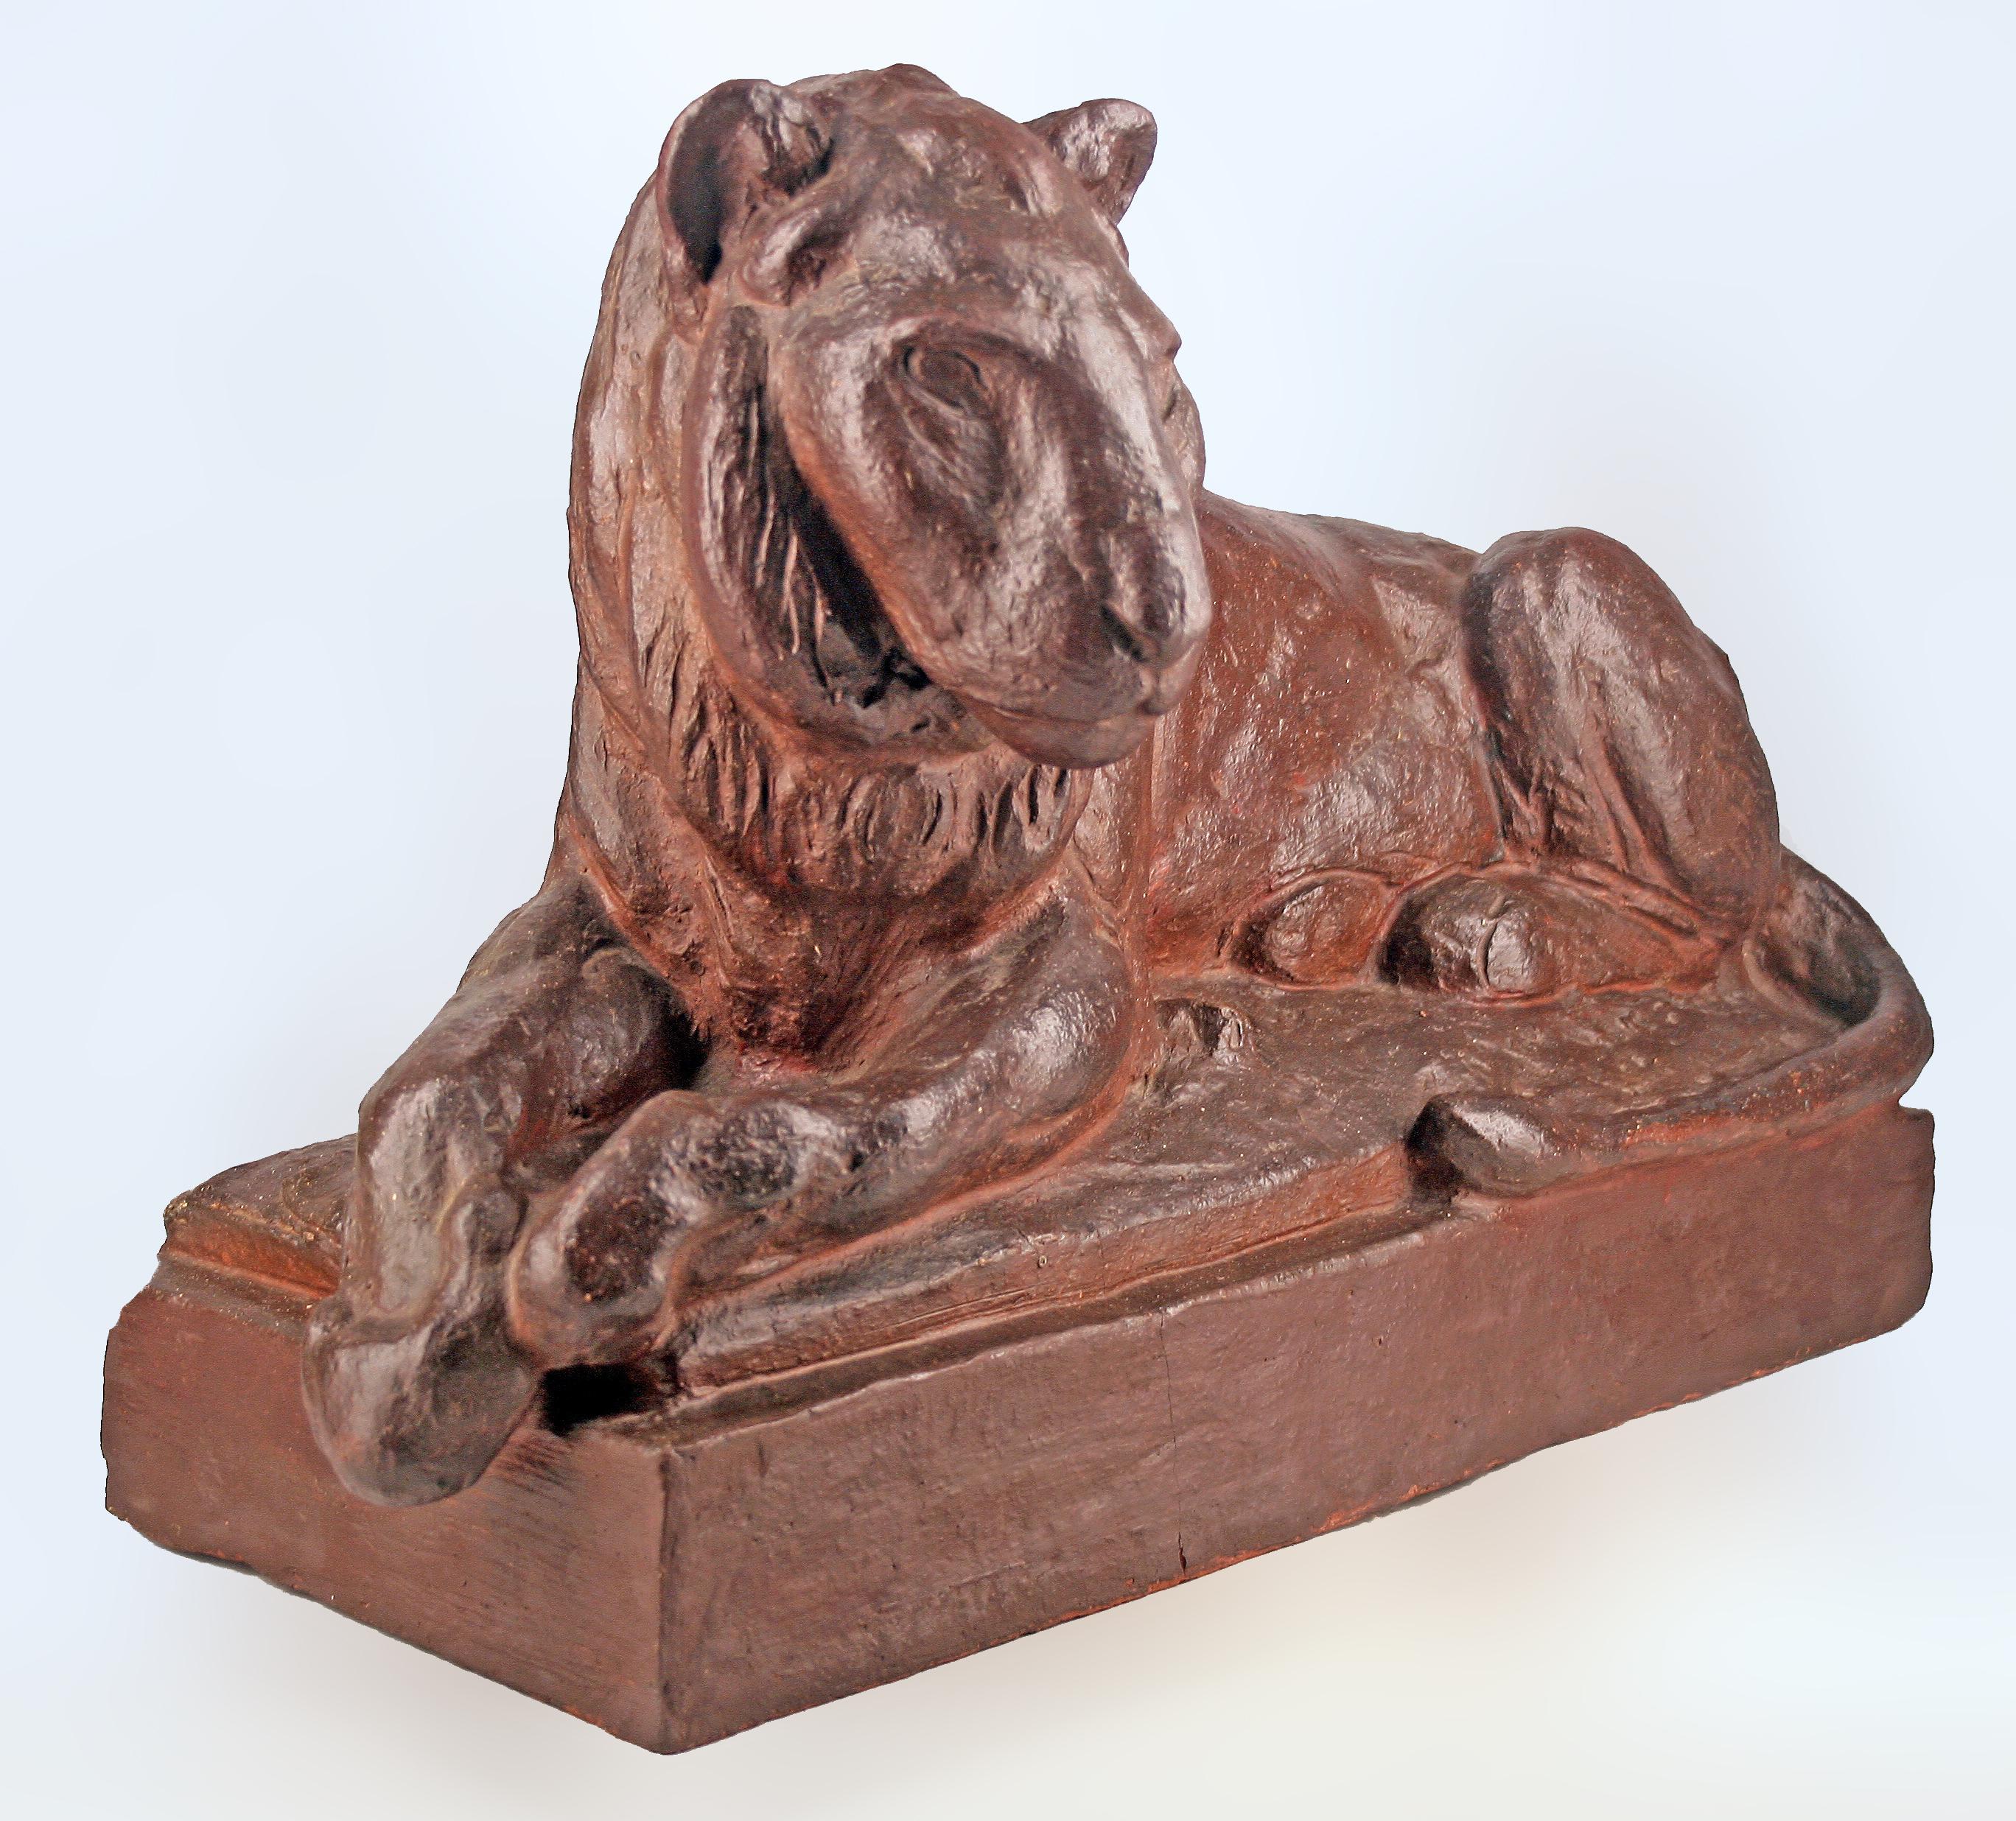 Late 19th century german terracotta sculpture of a resting lion by animalier author August Gaul

By: August Gaul
Material: terracotta
Technique: hand-crafted, molded, carved, hand-carved
Dimensions: 8.5 in x 20.5 in x 16.5 in
Date: late 19th